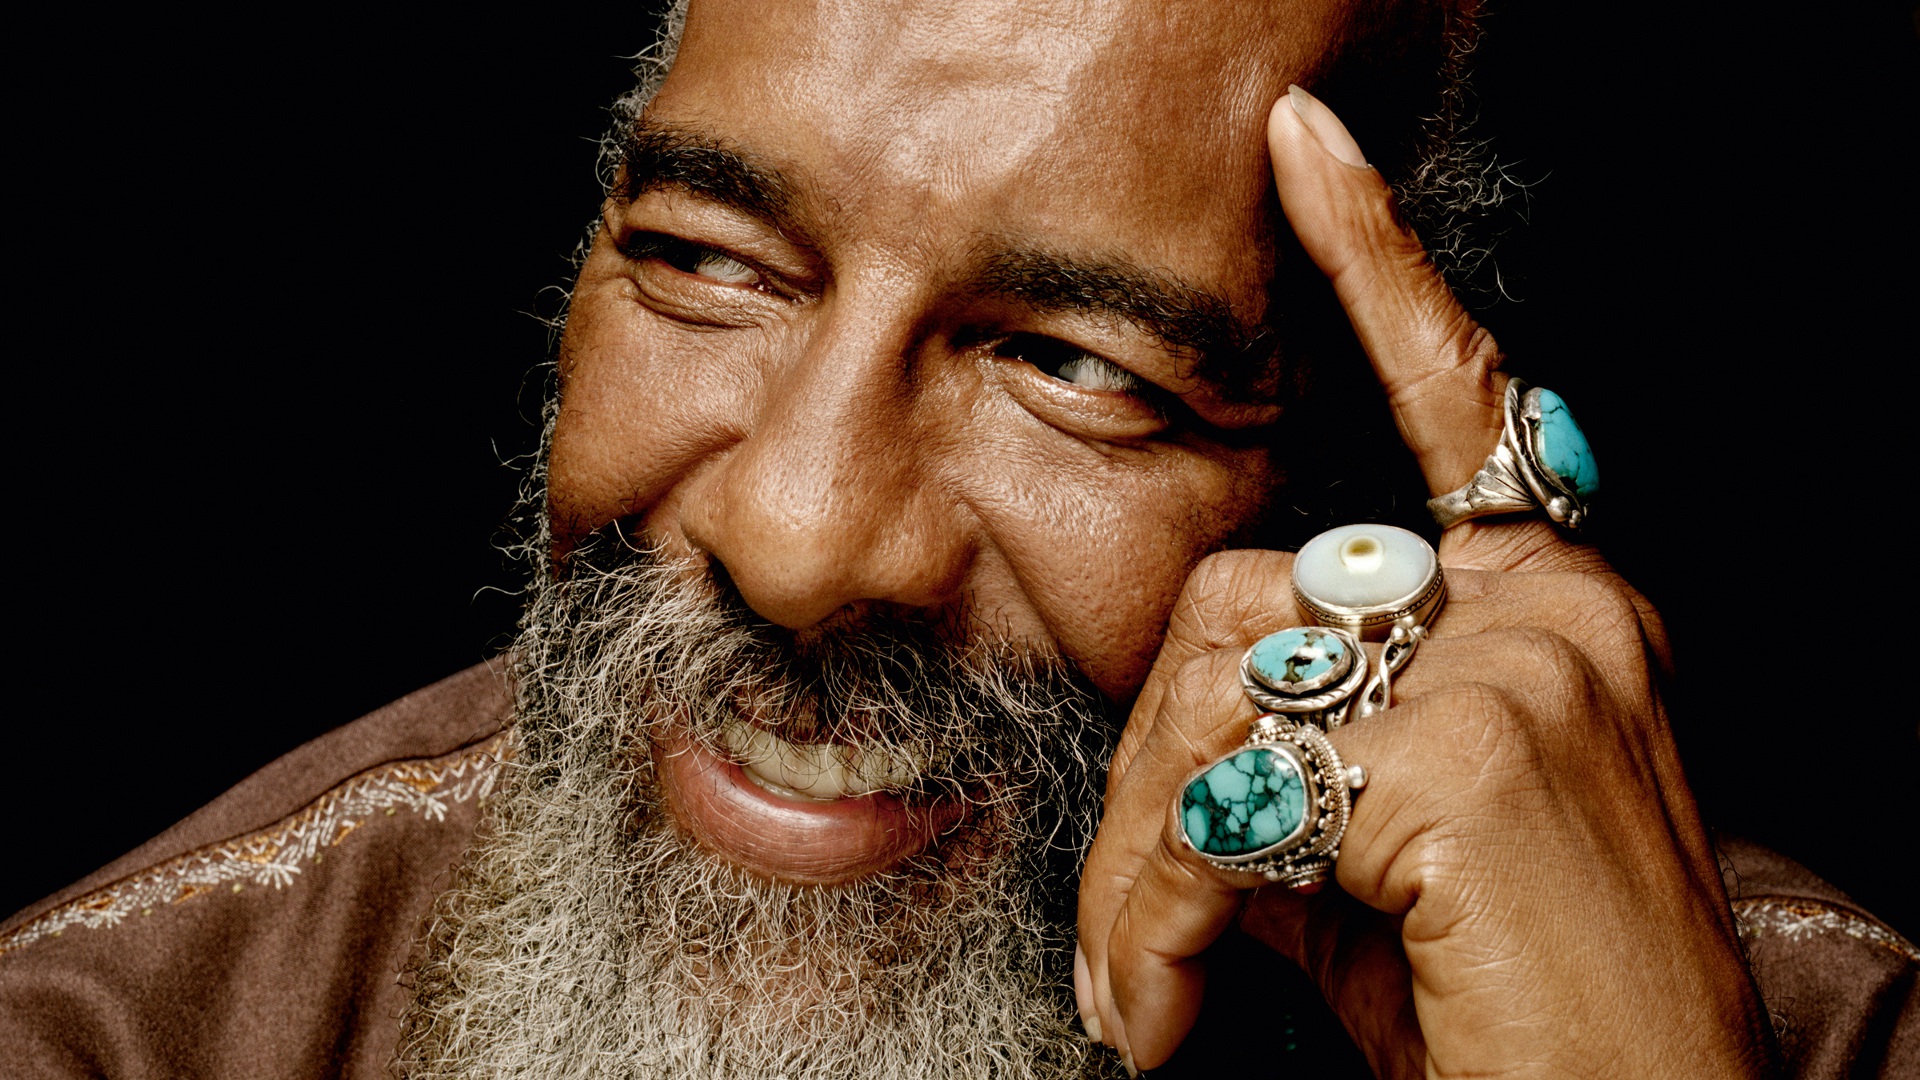 By The Grace Of The Sun av Richie Havens